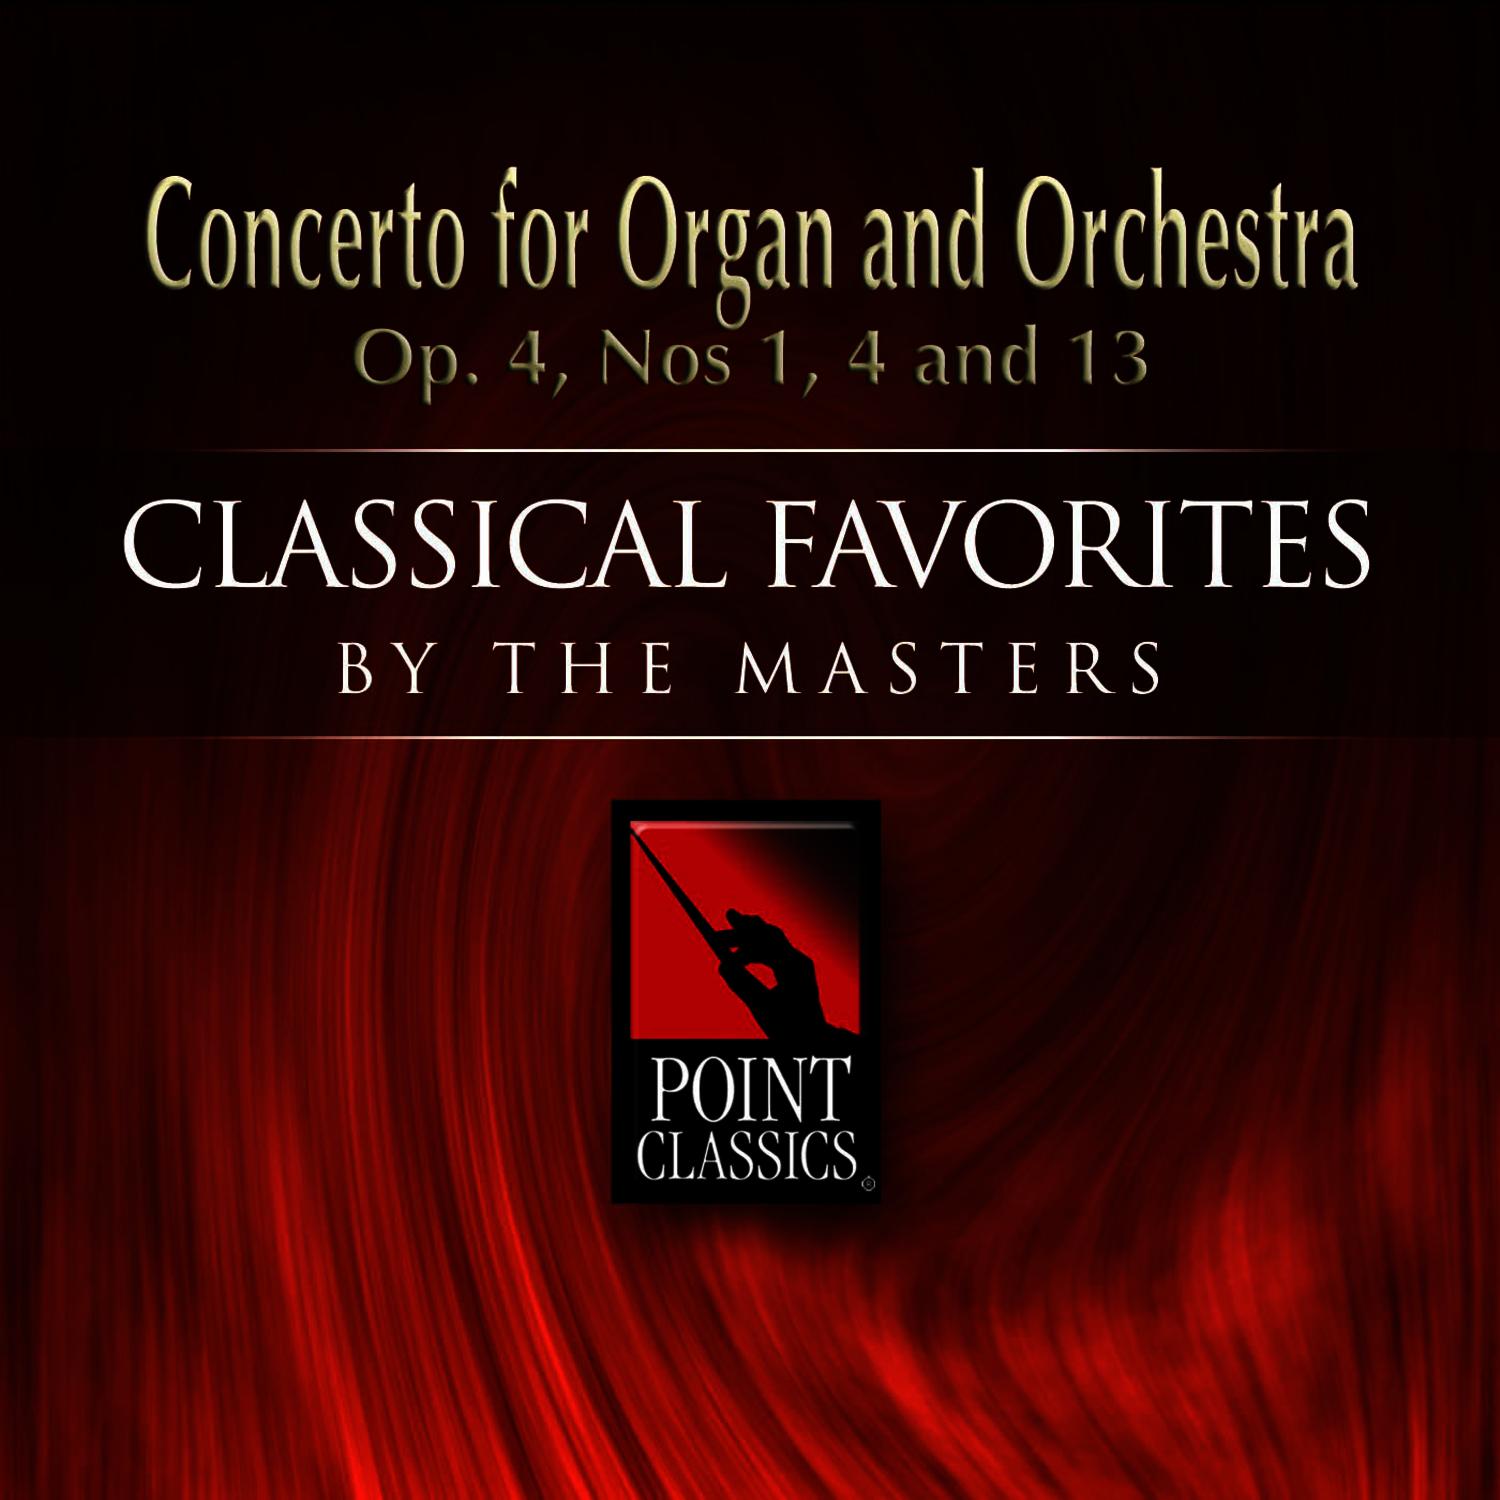 Concerto for Organ and Orchestra Op. 4, Nos 1, 4 and 13